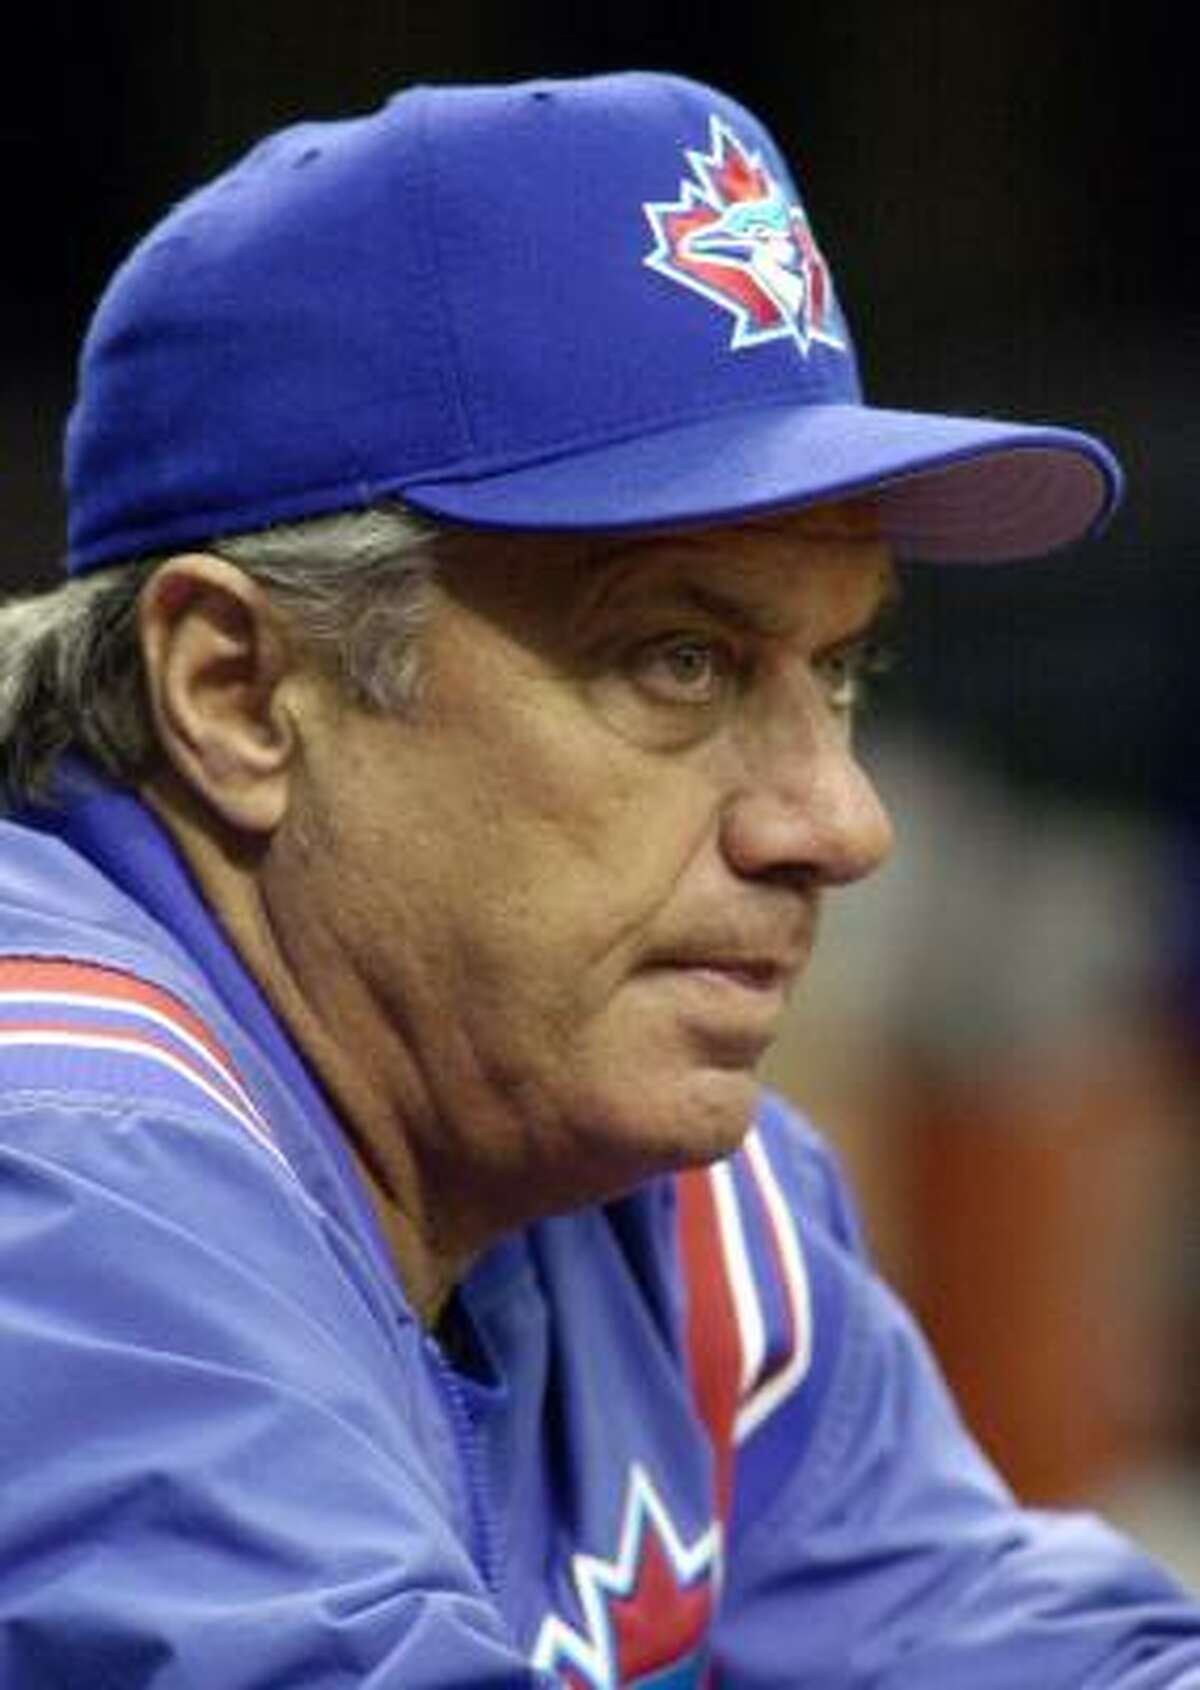 In addition to the Blue Jays, Jim Fregosi has managed the Angels, White Sox and Phillies.